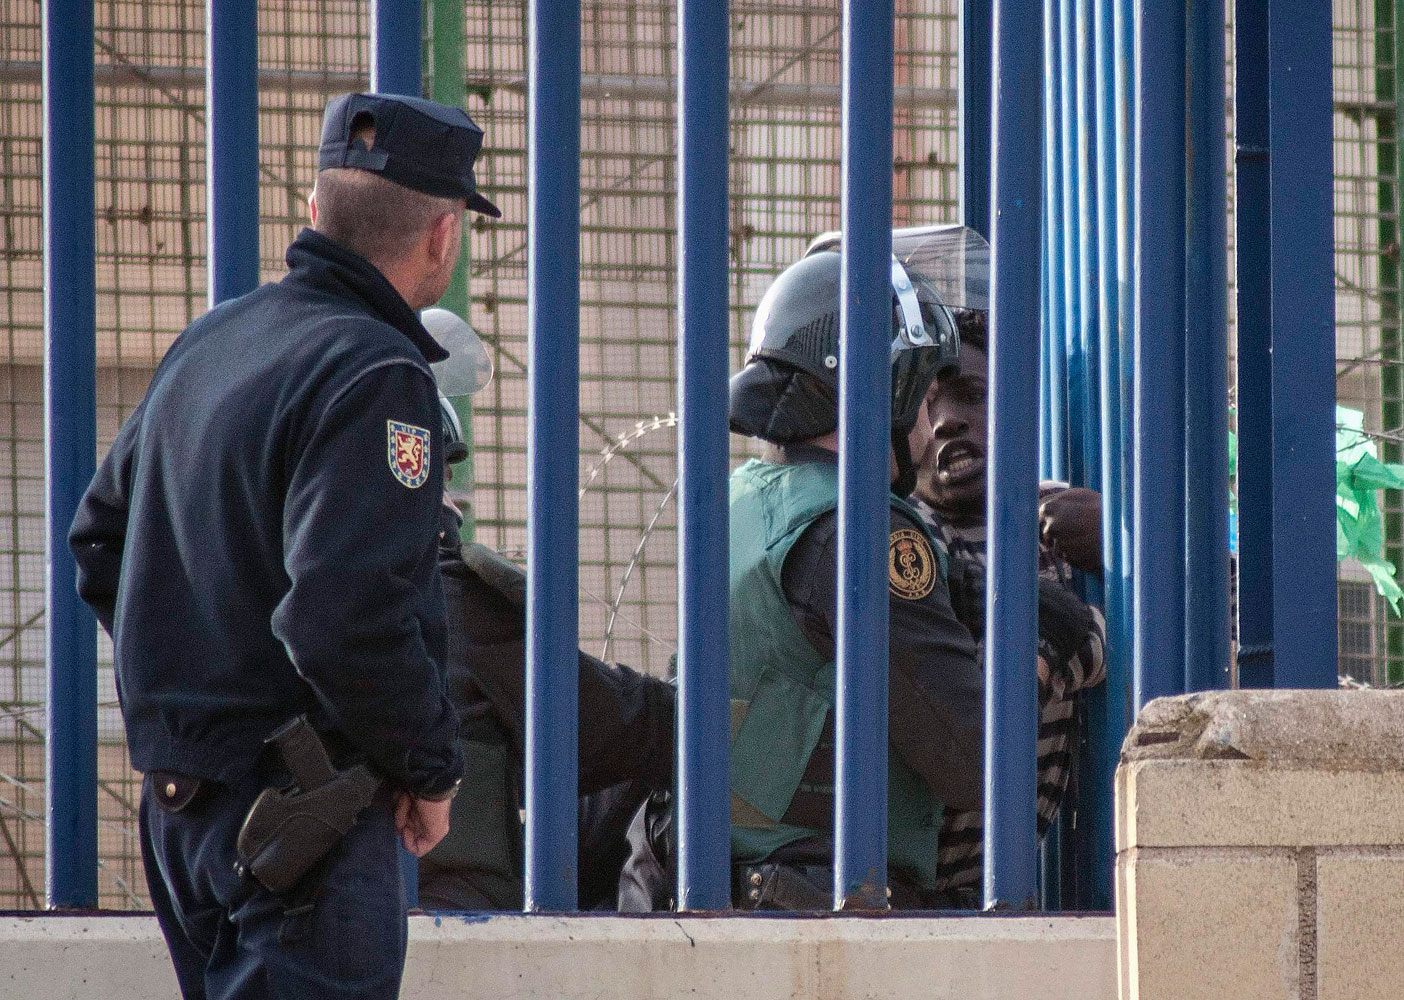 An African migrant is detained by a Spanish civil guard at the border fence near Beni Enza between Morocco and Spain's north African enclave Melilla while attempting to cross into Spanish territory, March 28, 2014.